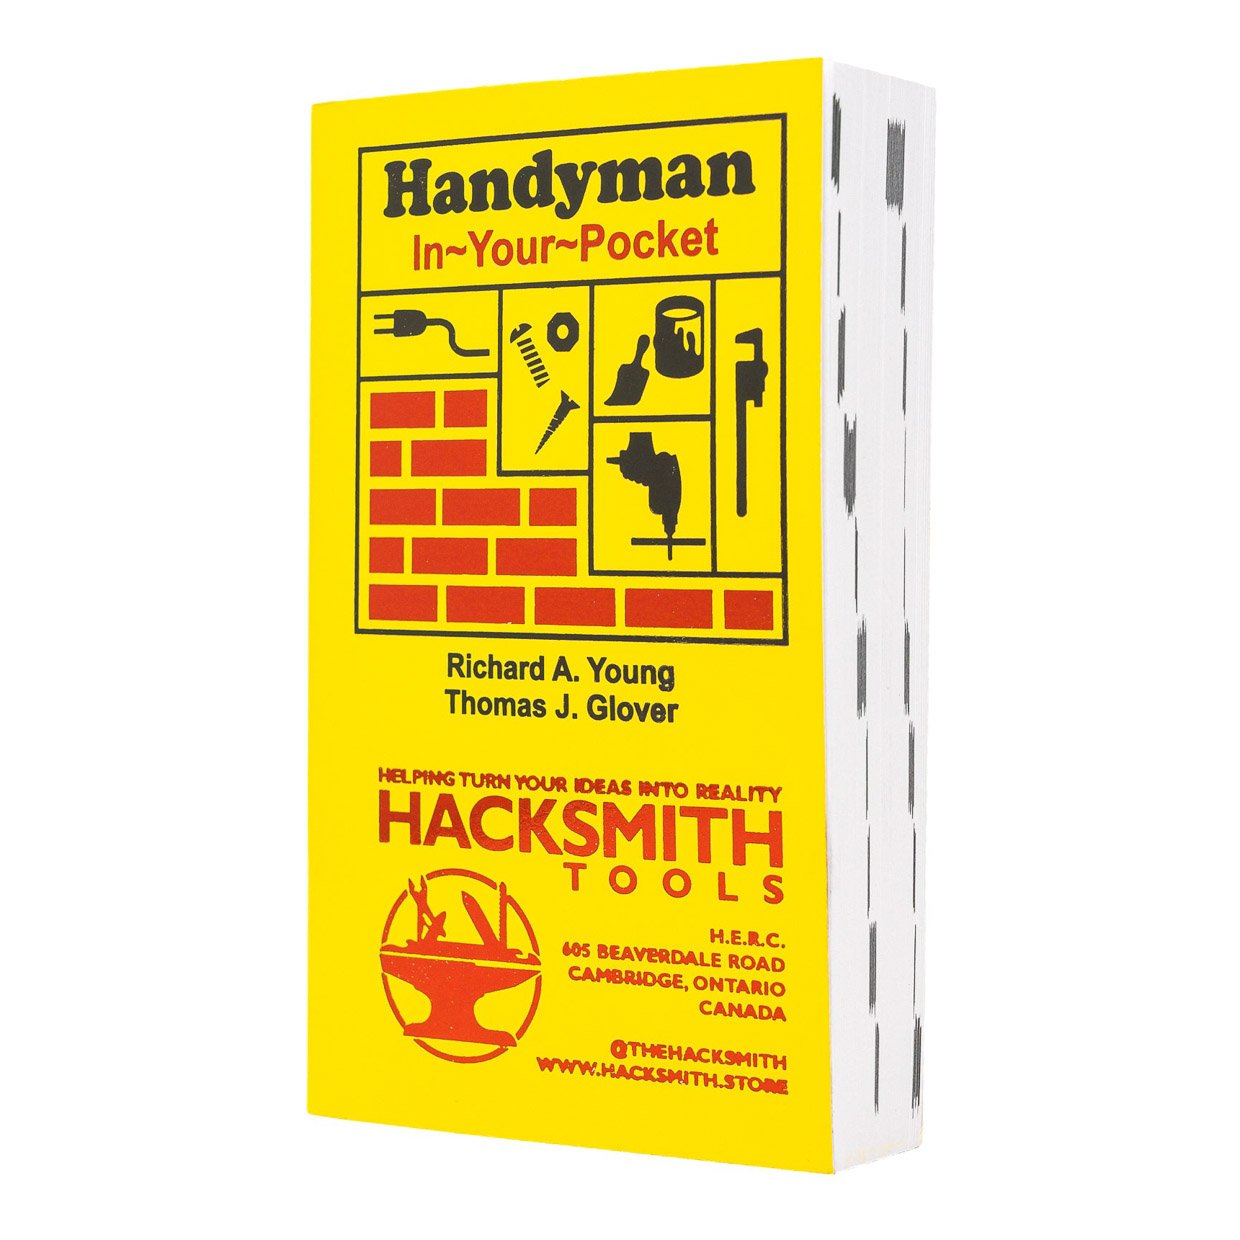 Handyman in Your Pocket Reference Book